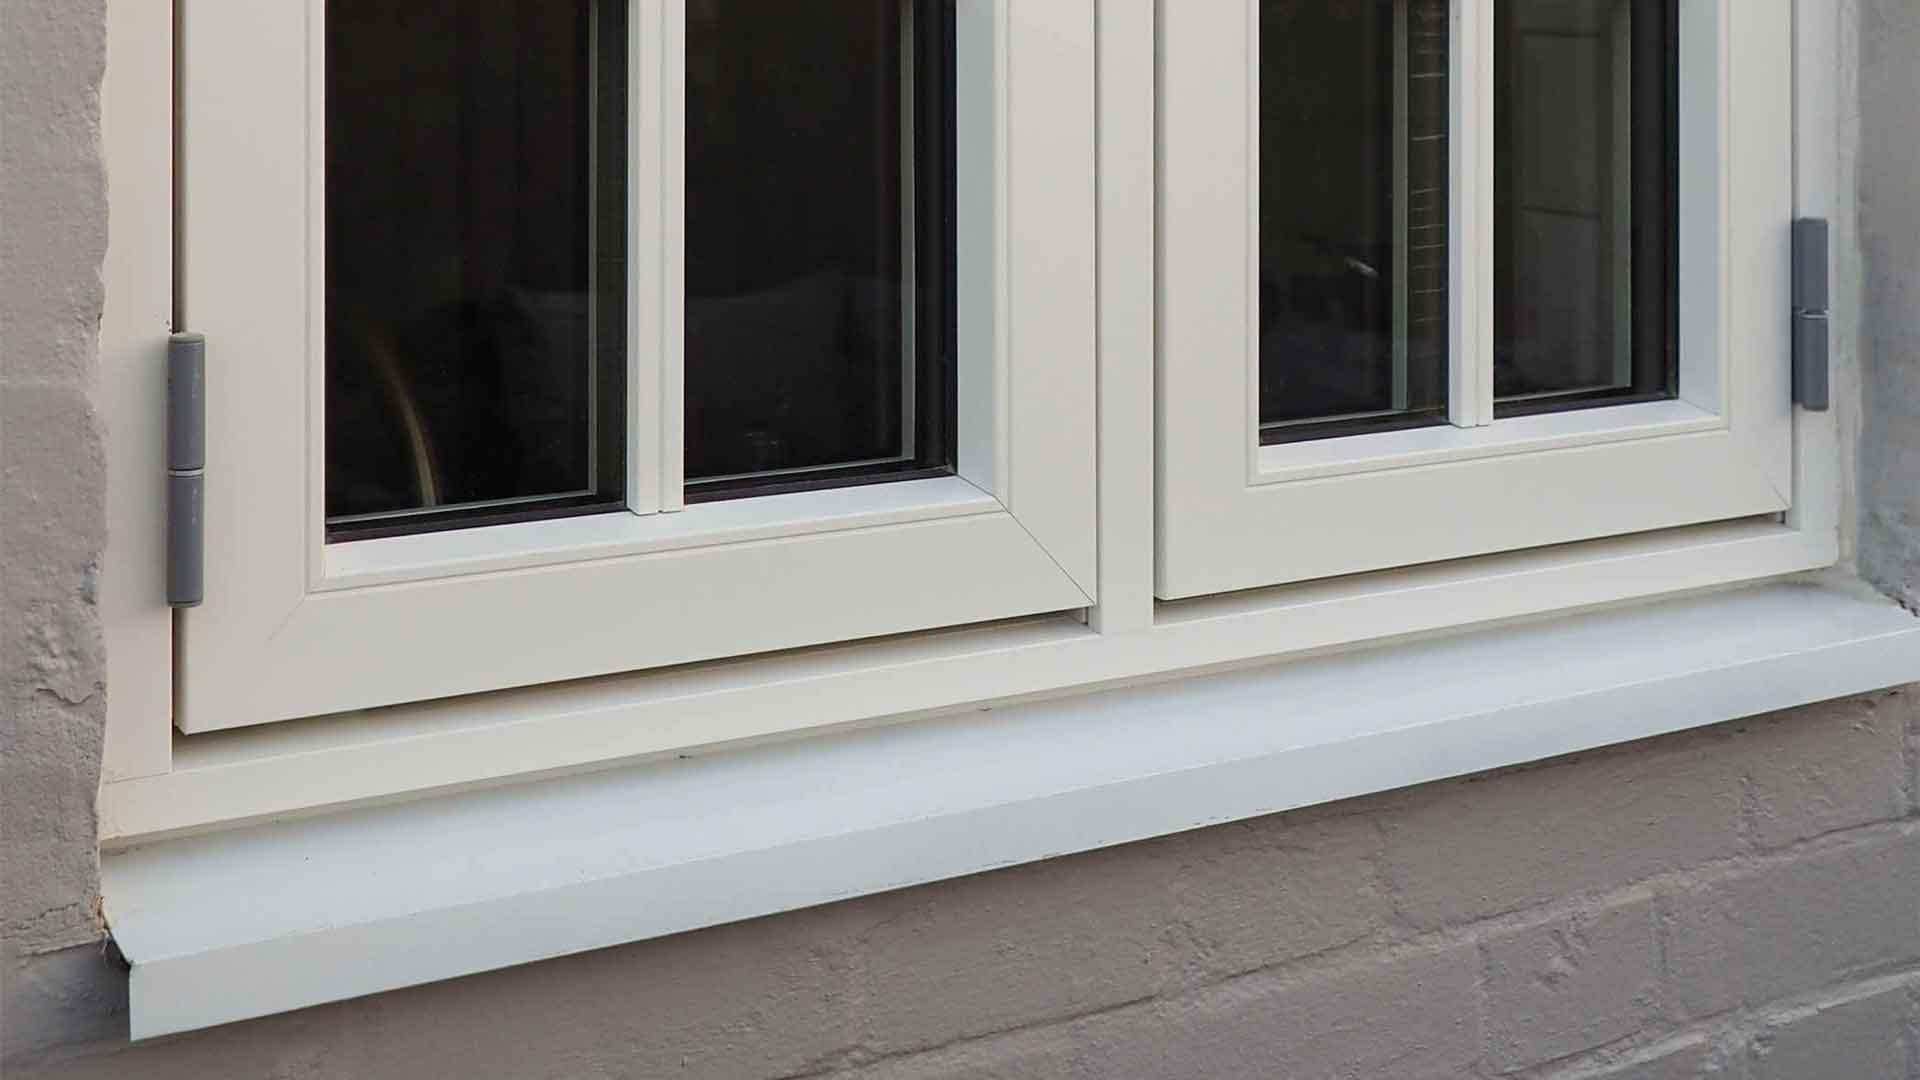 A cottage window with an aluminium cill